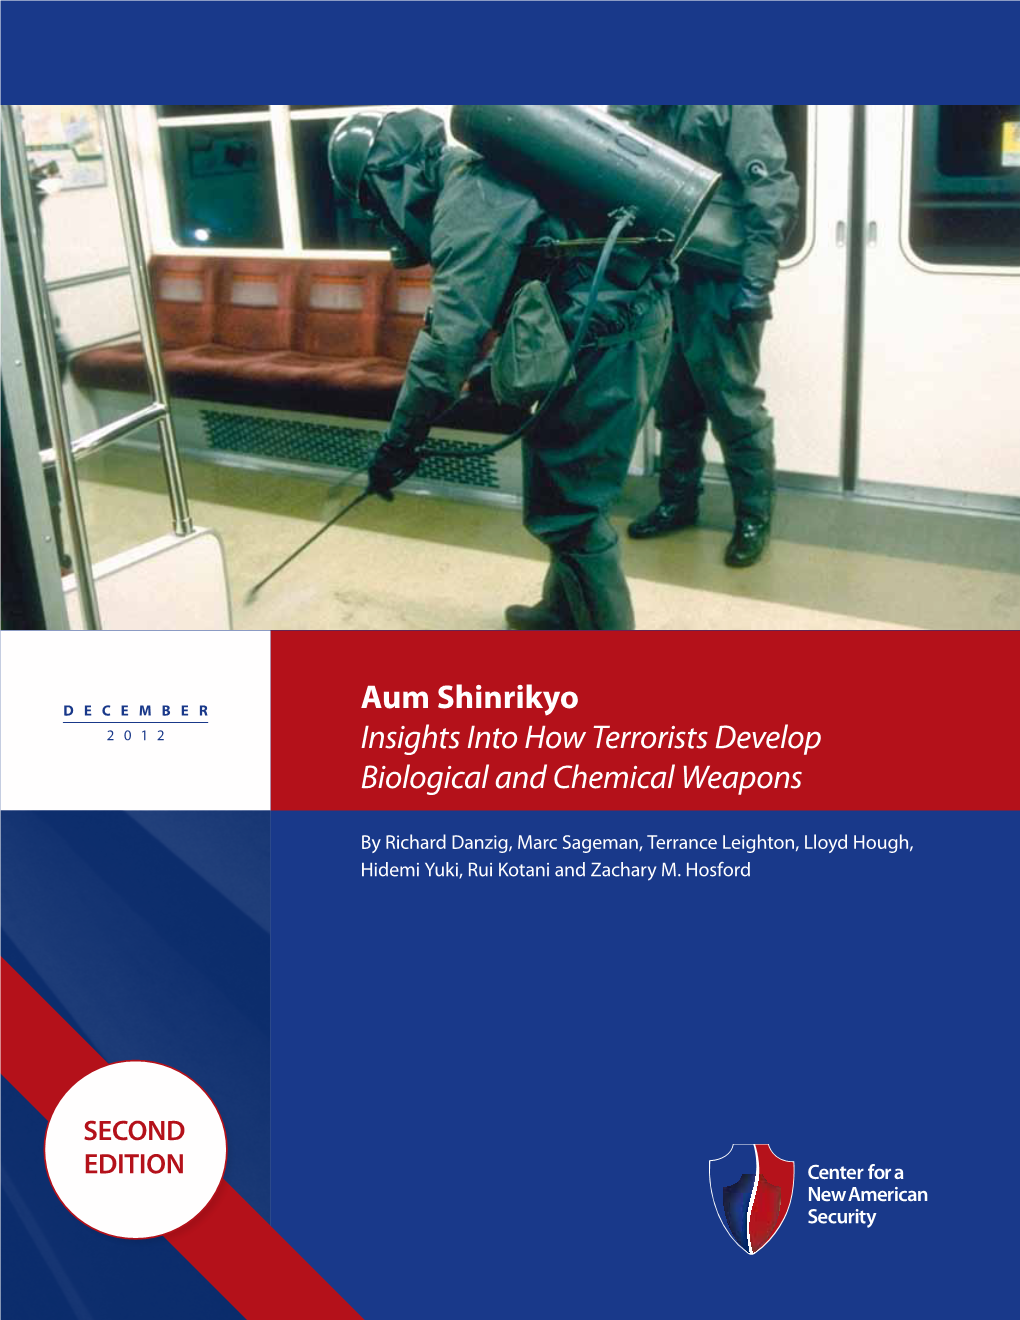 Aum Shinrikyo 2012 Insights Into How Terrorists Develop Biological and Chemical Weapons